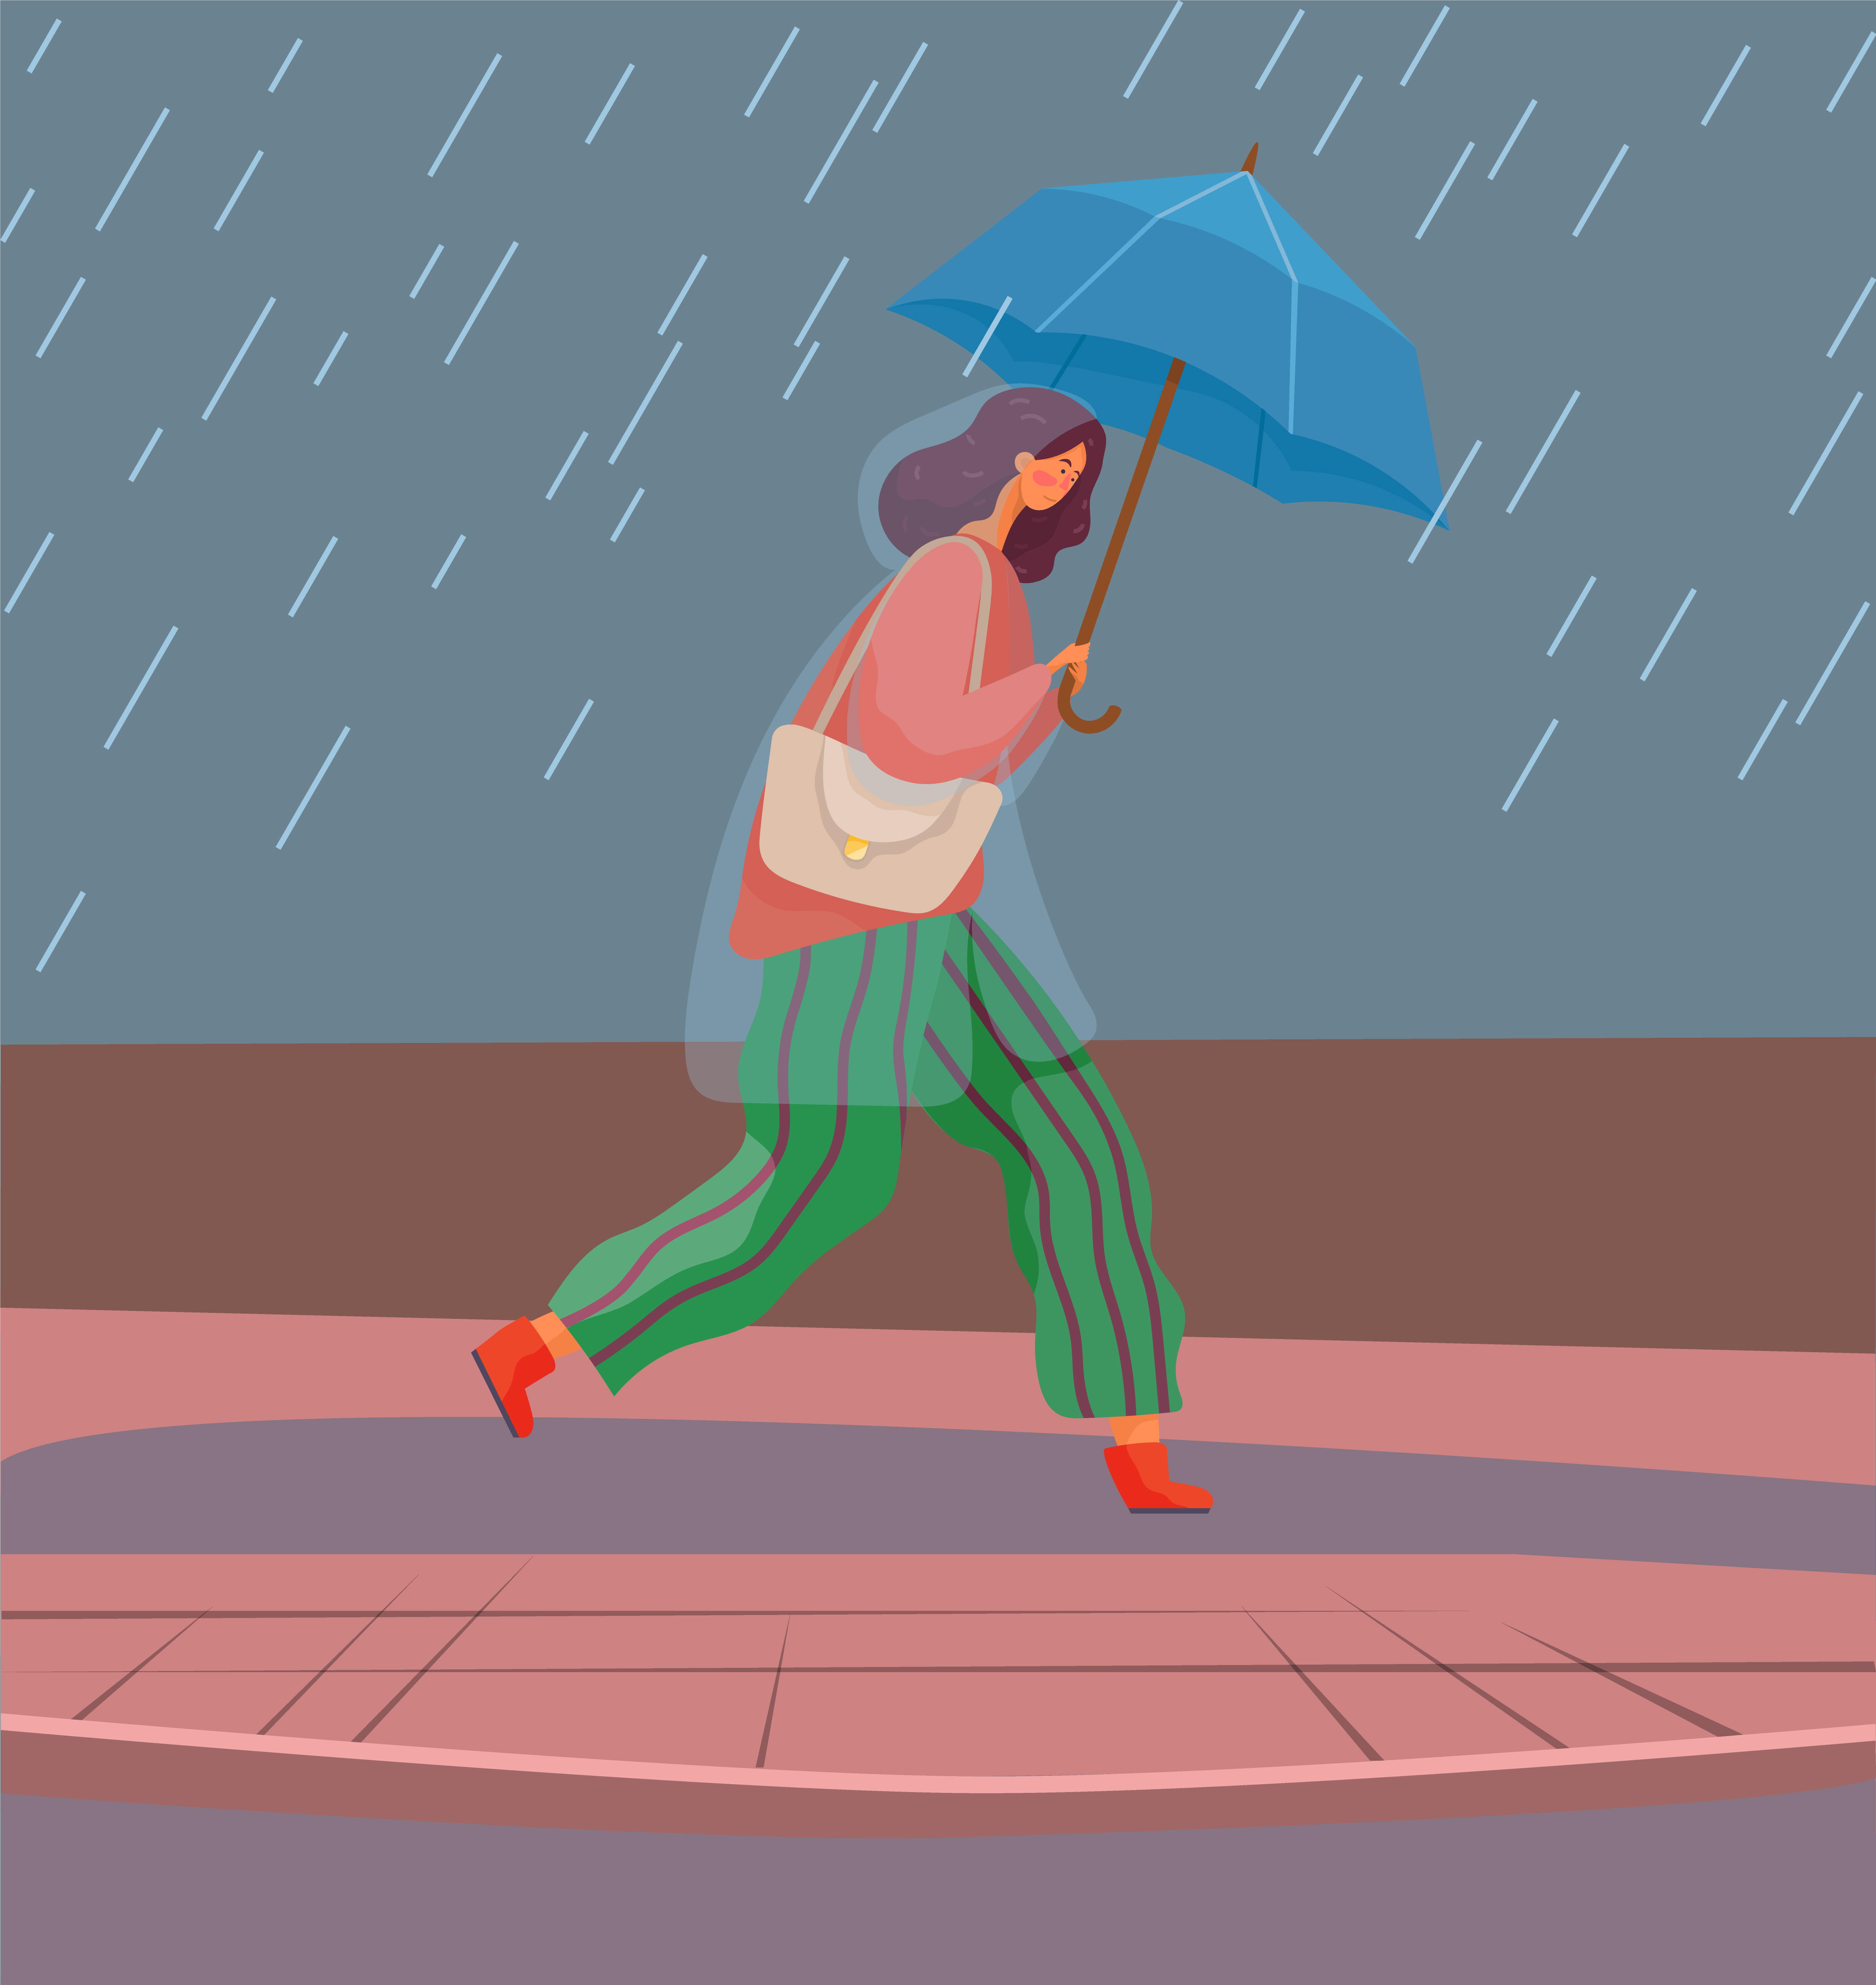 Woman with umbrella under autumn rain walking on puddles vector. Rainfall and fall weather, girl in raincoat with parasol, seasonal forecast changes. Person and outdoor activity illustration. Girl in Rain with Umbrella, Autumn Rainy Weather